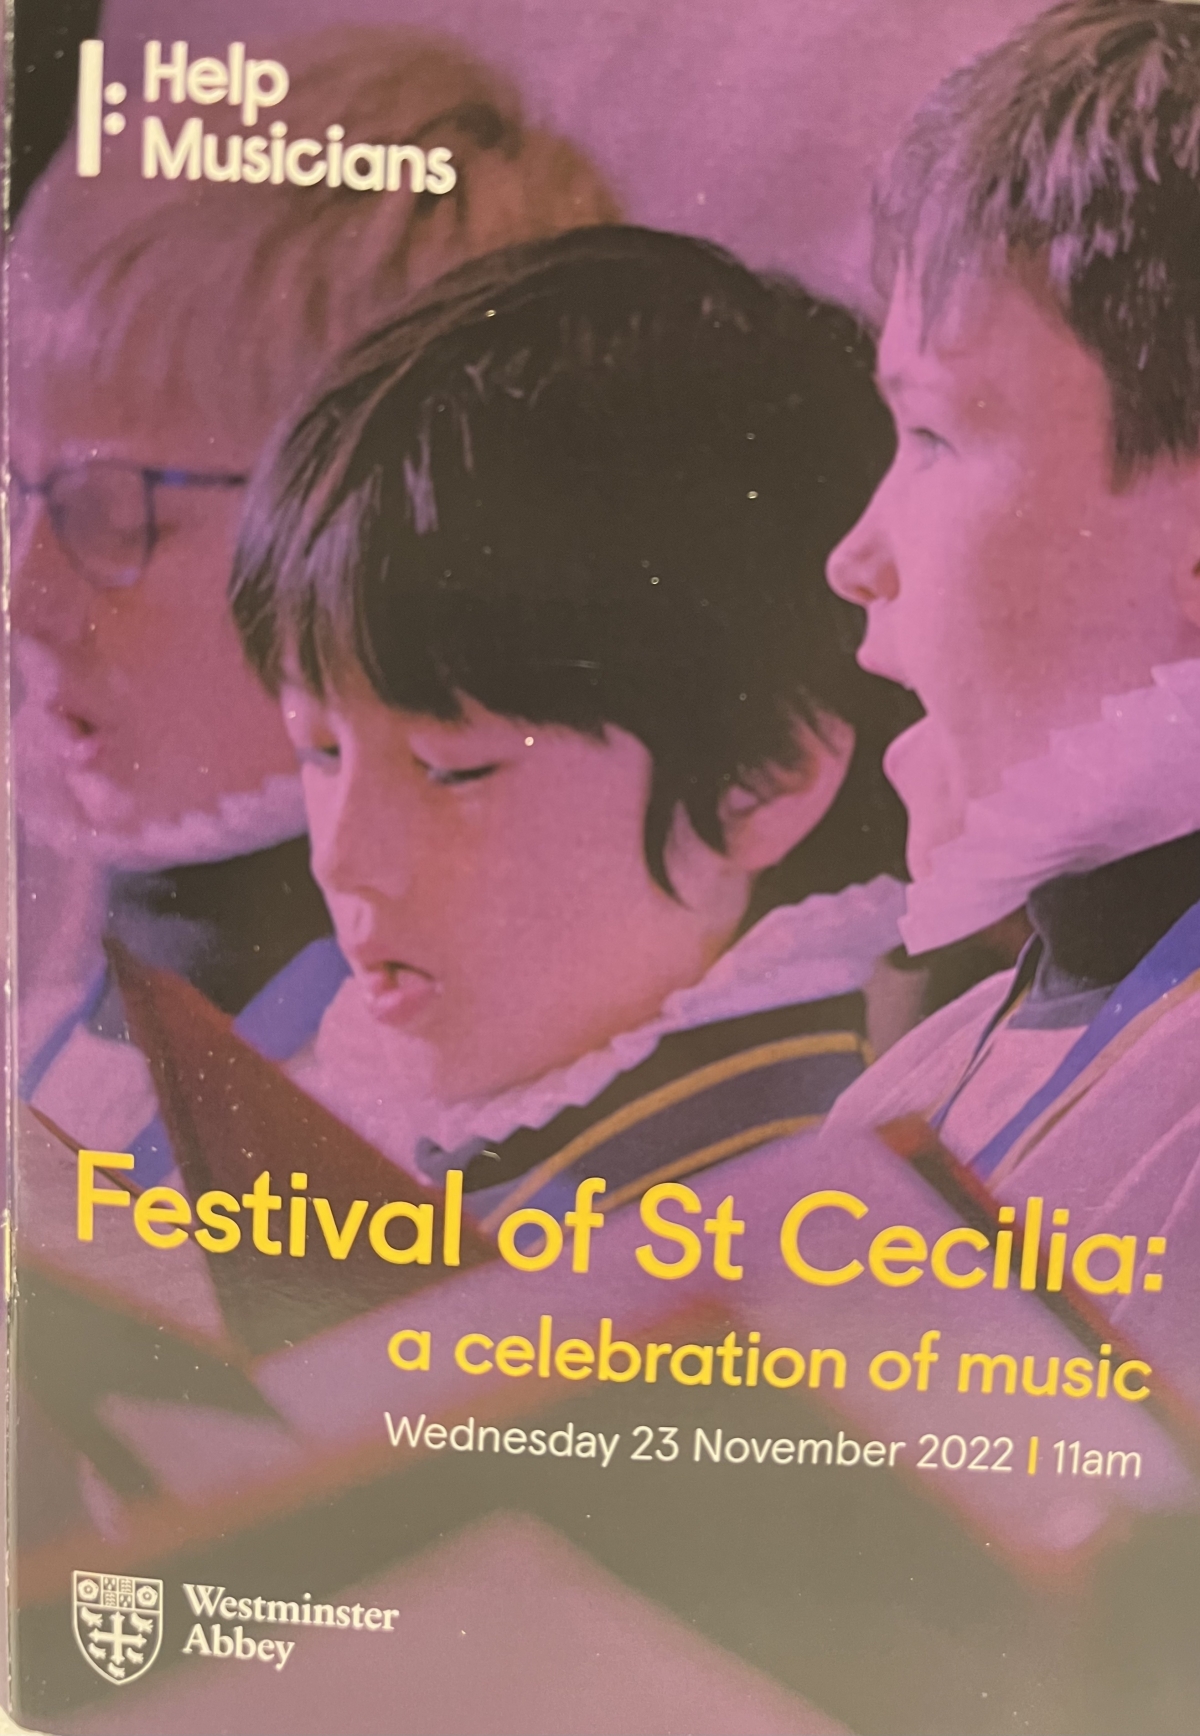 Festival of St Cecilia Westminster Abbey